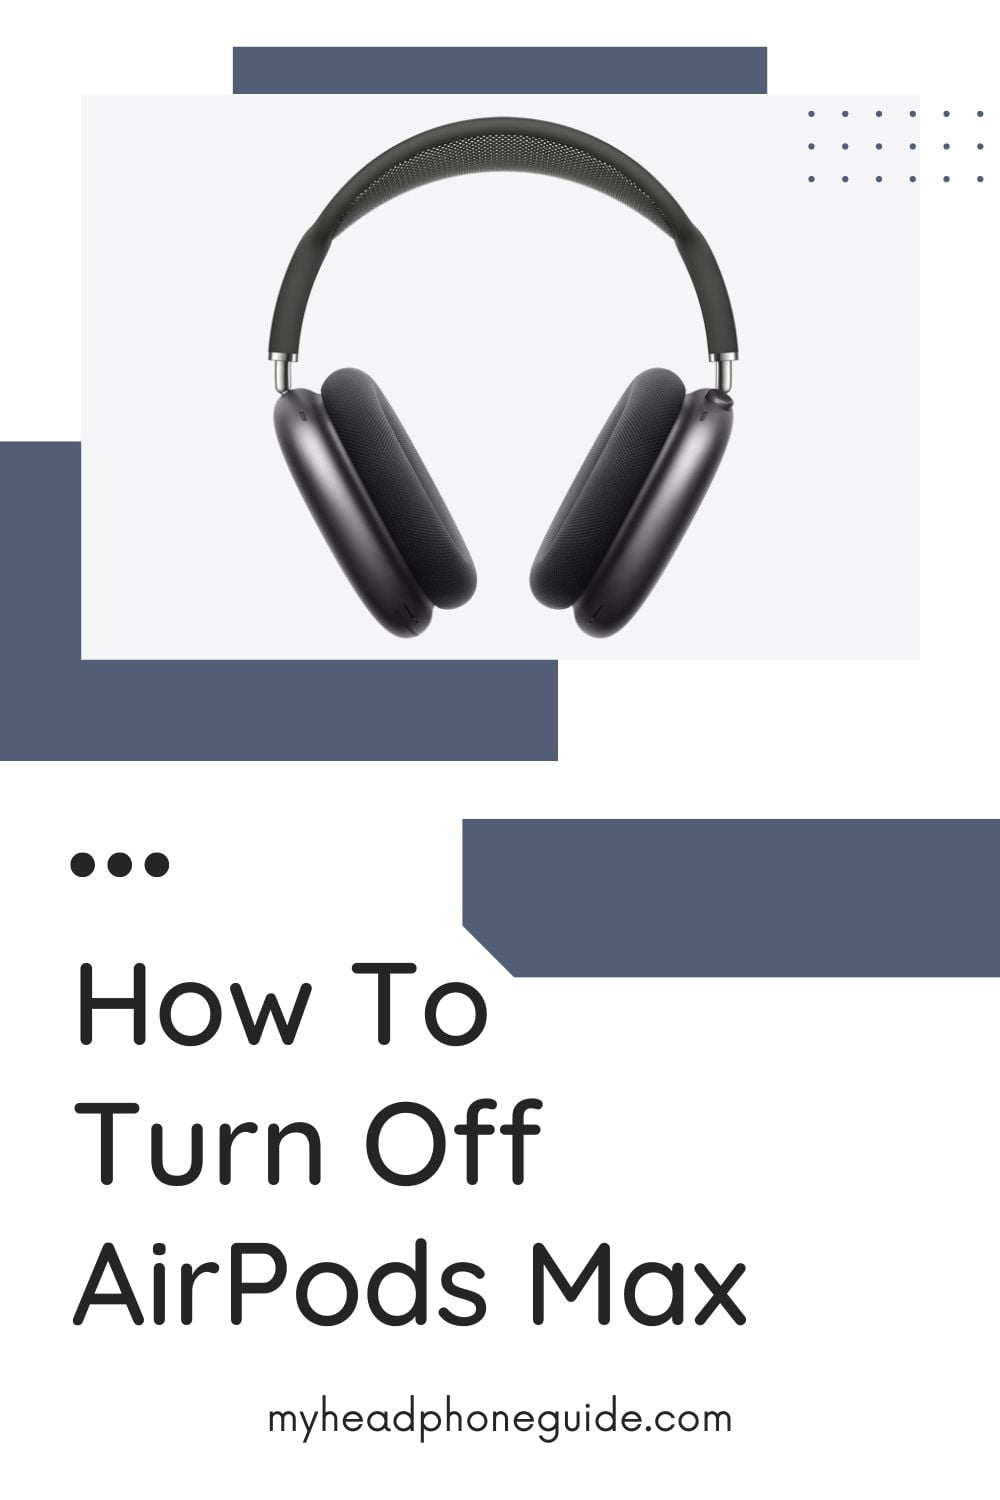 How to turn off AirPods Max